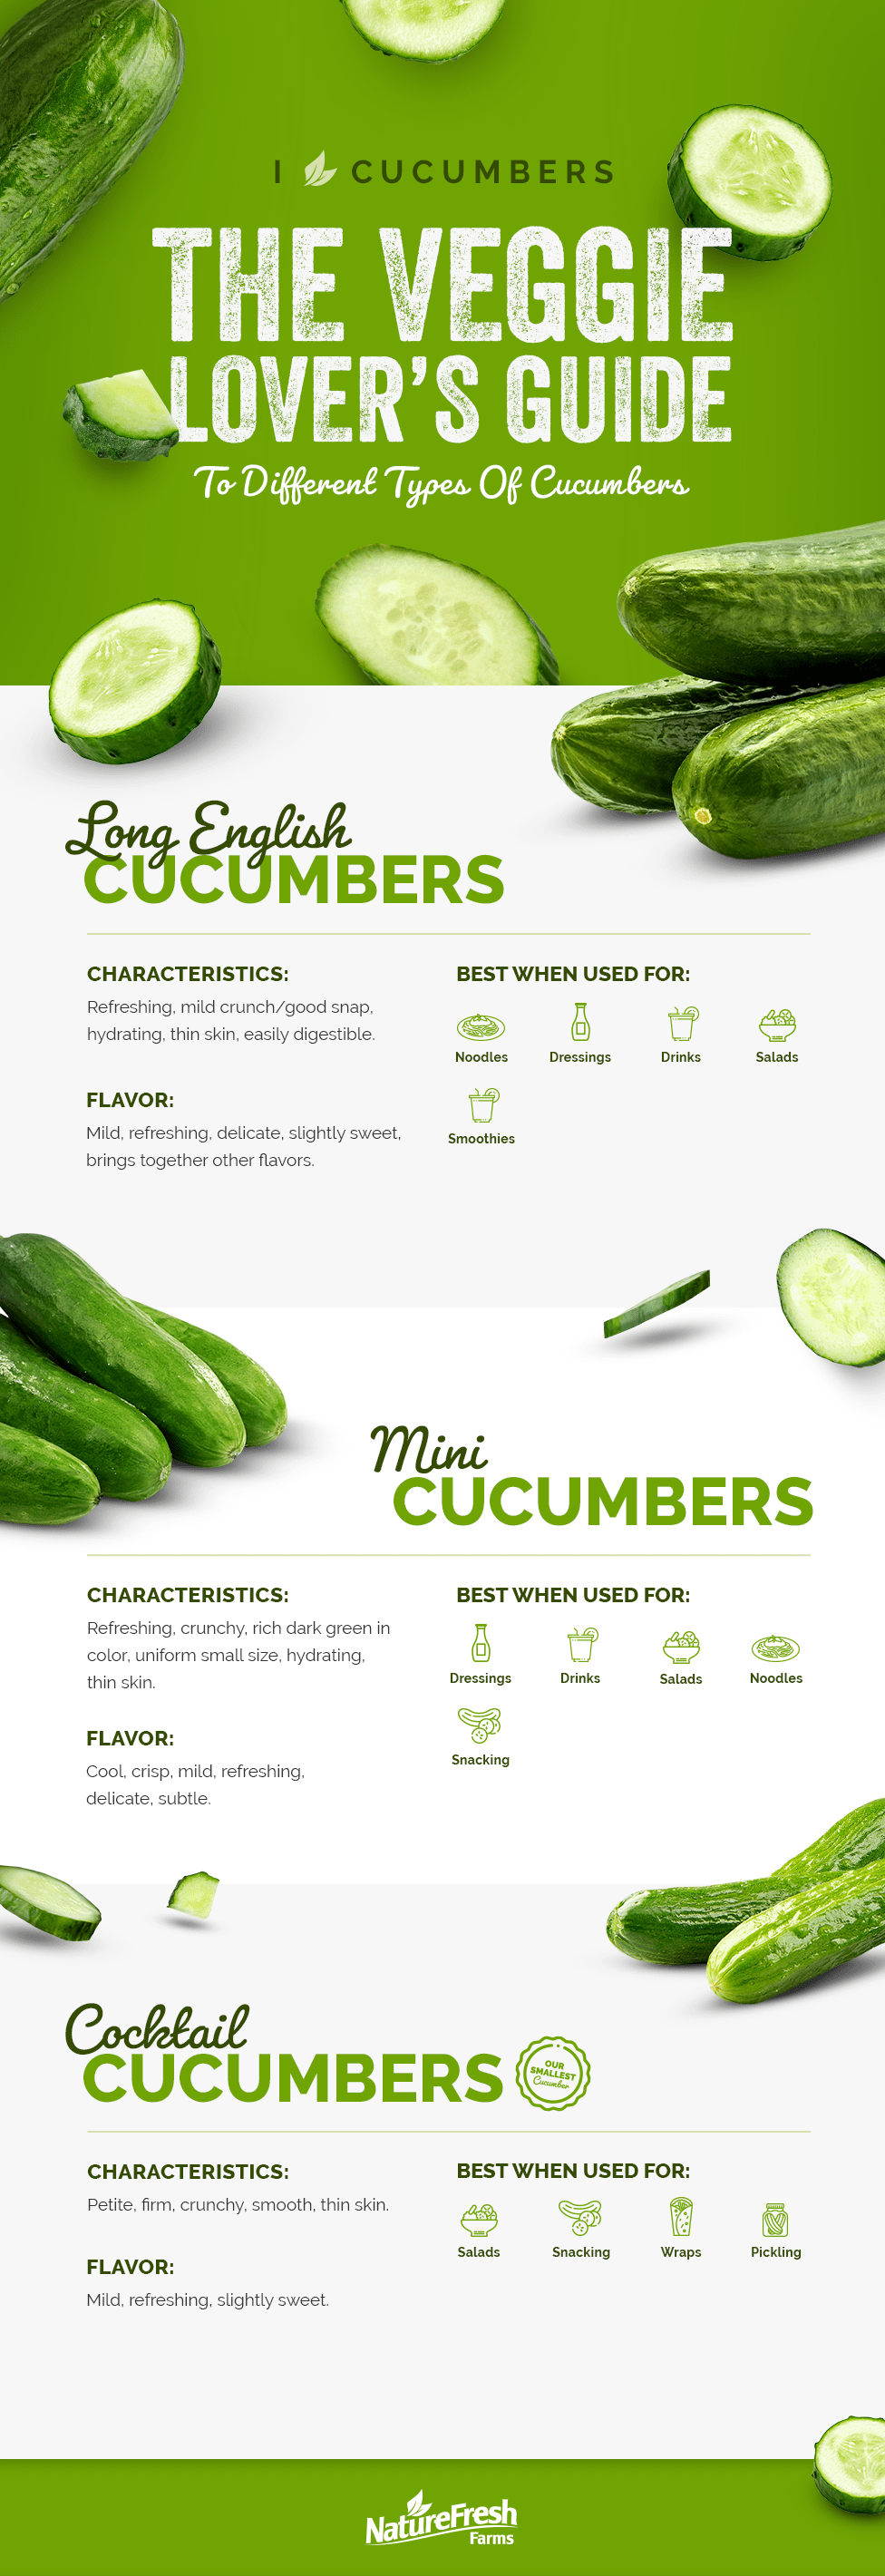 https://www.naturefresh.ca/wp-content/uploads/20.05-NFF-Cucumber-Guide-Infographic.png